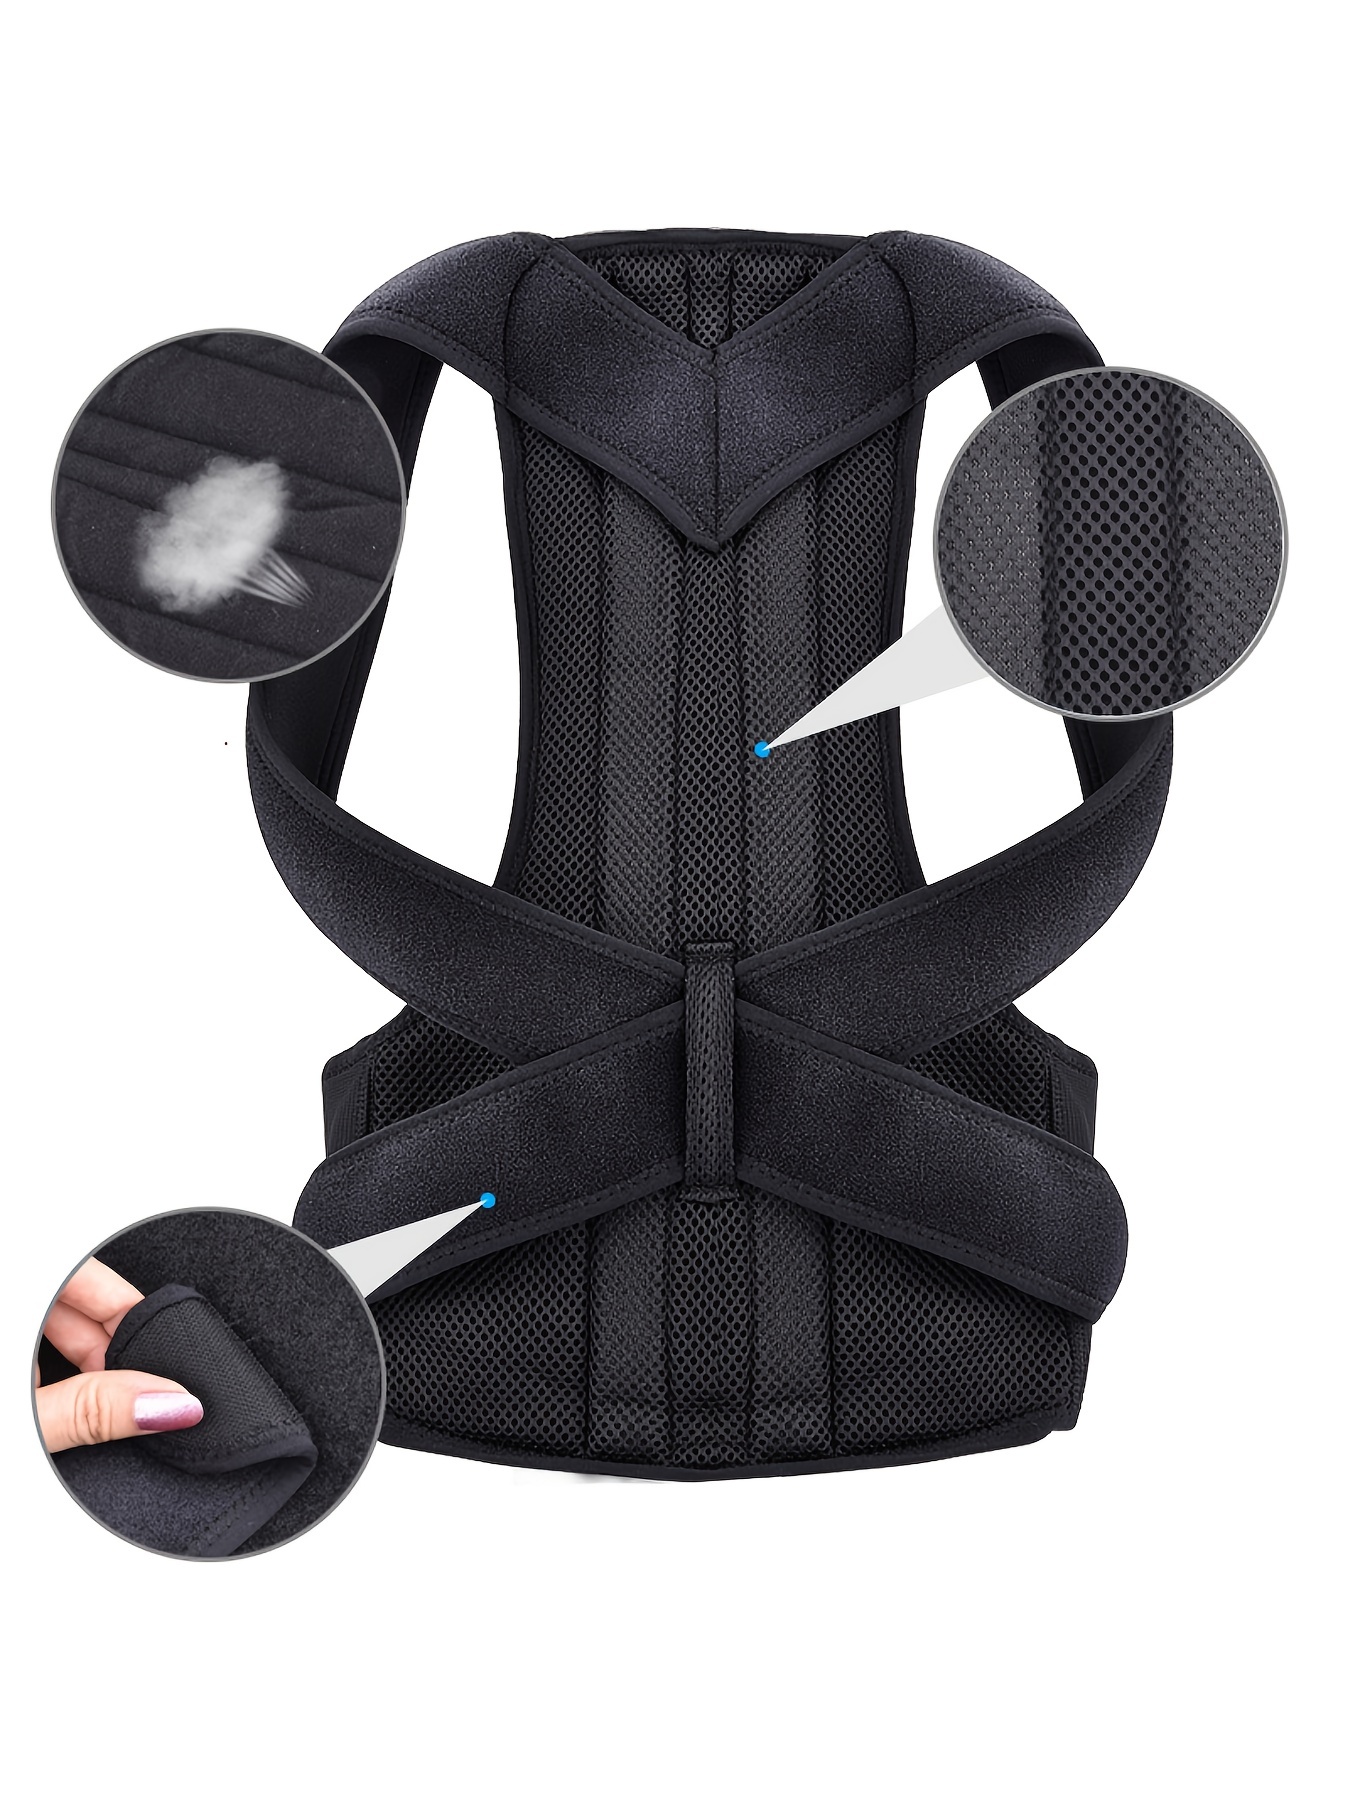 Adjustable Back Posture Corrector for Women Men,Posture Brace with  Supportive Bars and Comfy Underarm Pads for Posture Improve (Color : Black,  Size : Medium) : : Sports & Outdoors